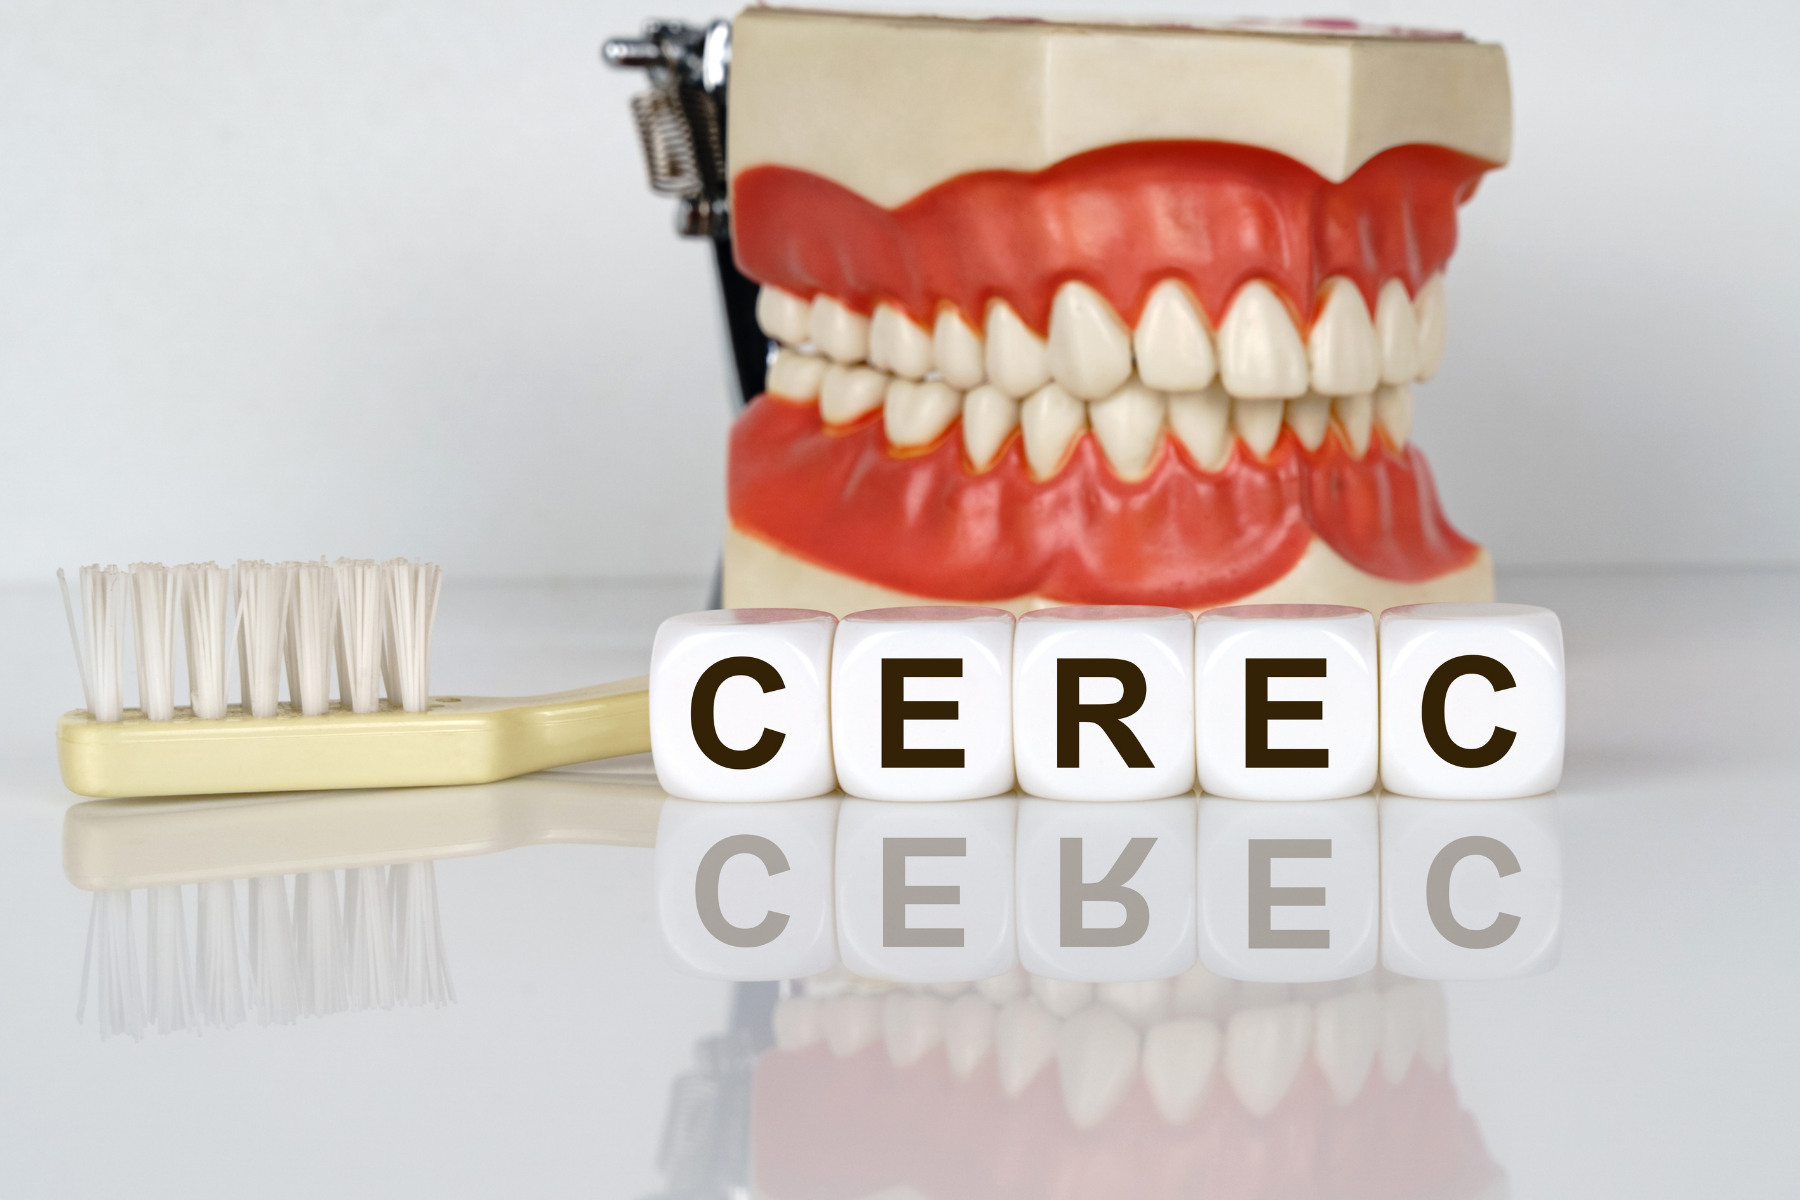 Don't Wait! Repair Damaged Teeth With CEREC Same-Day Dental Crowns